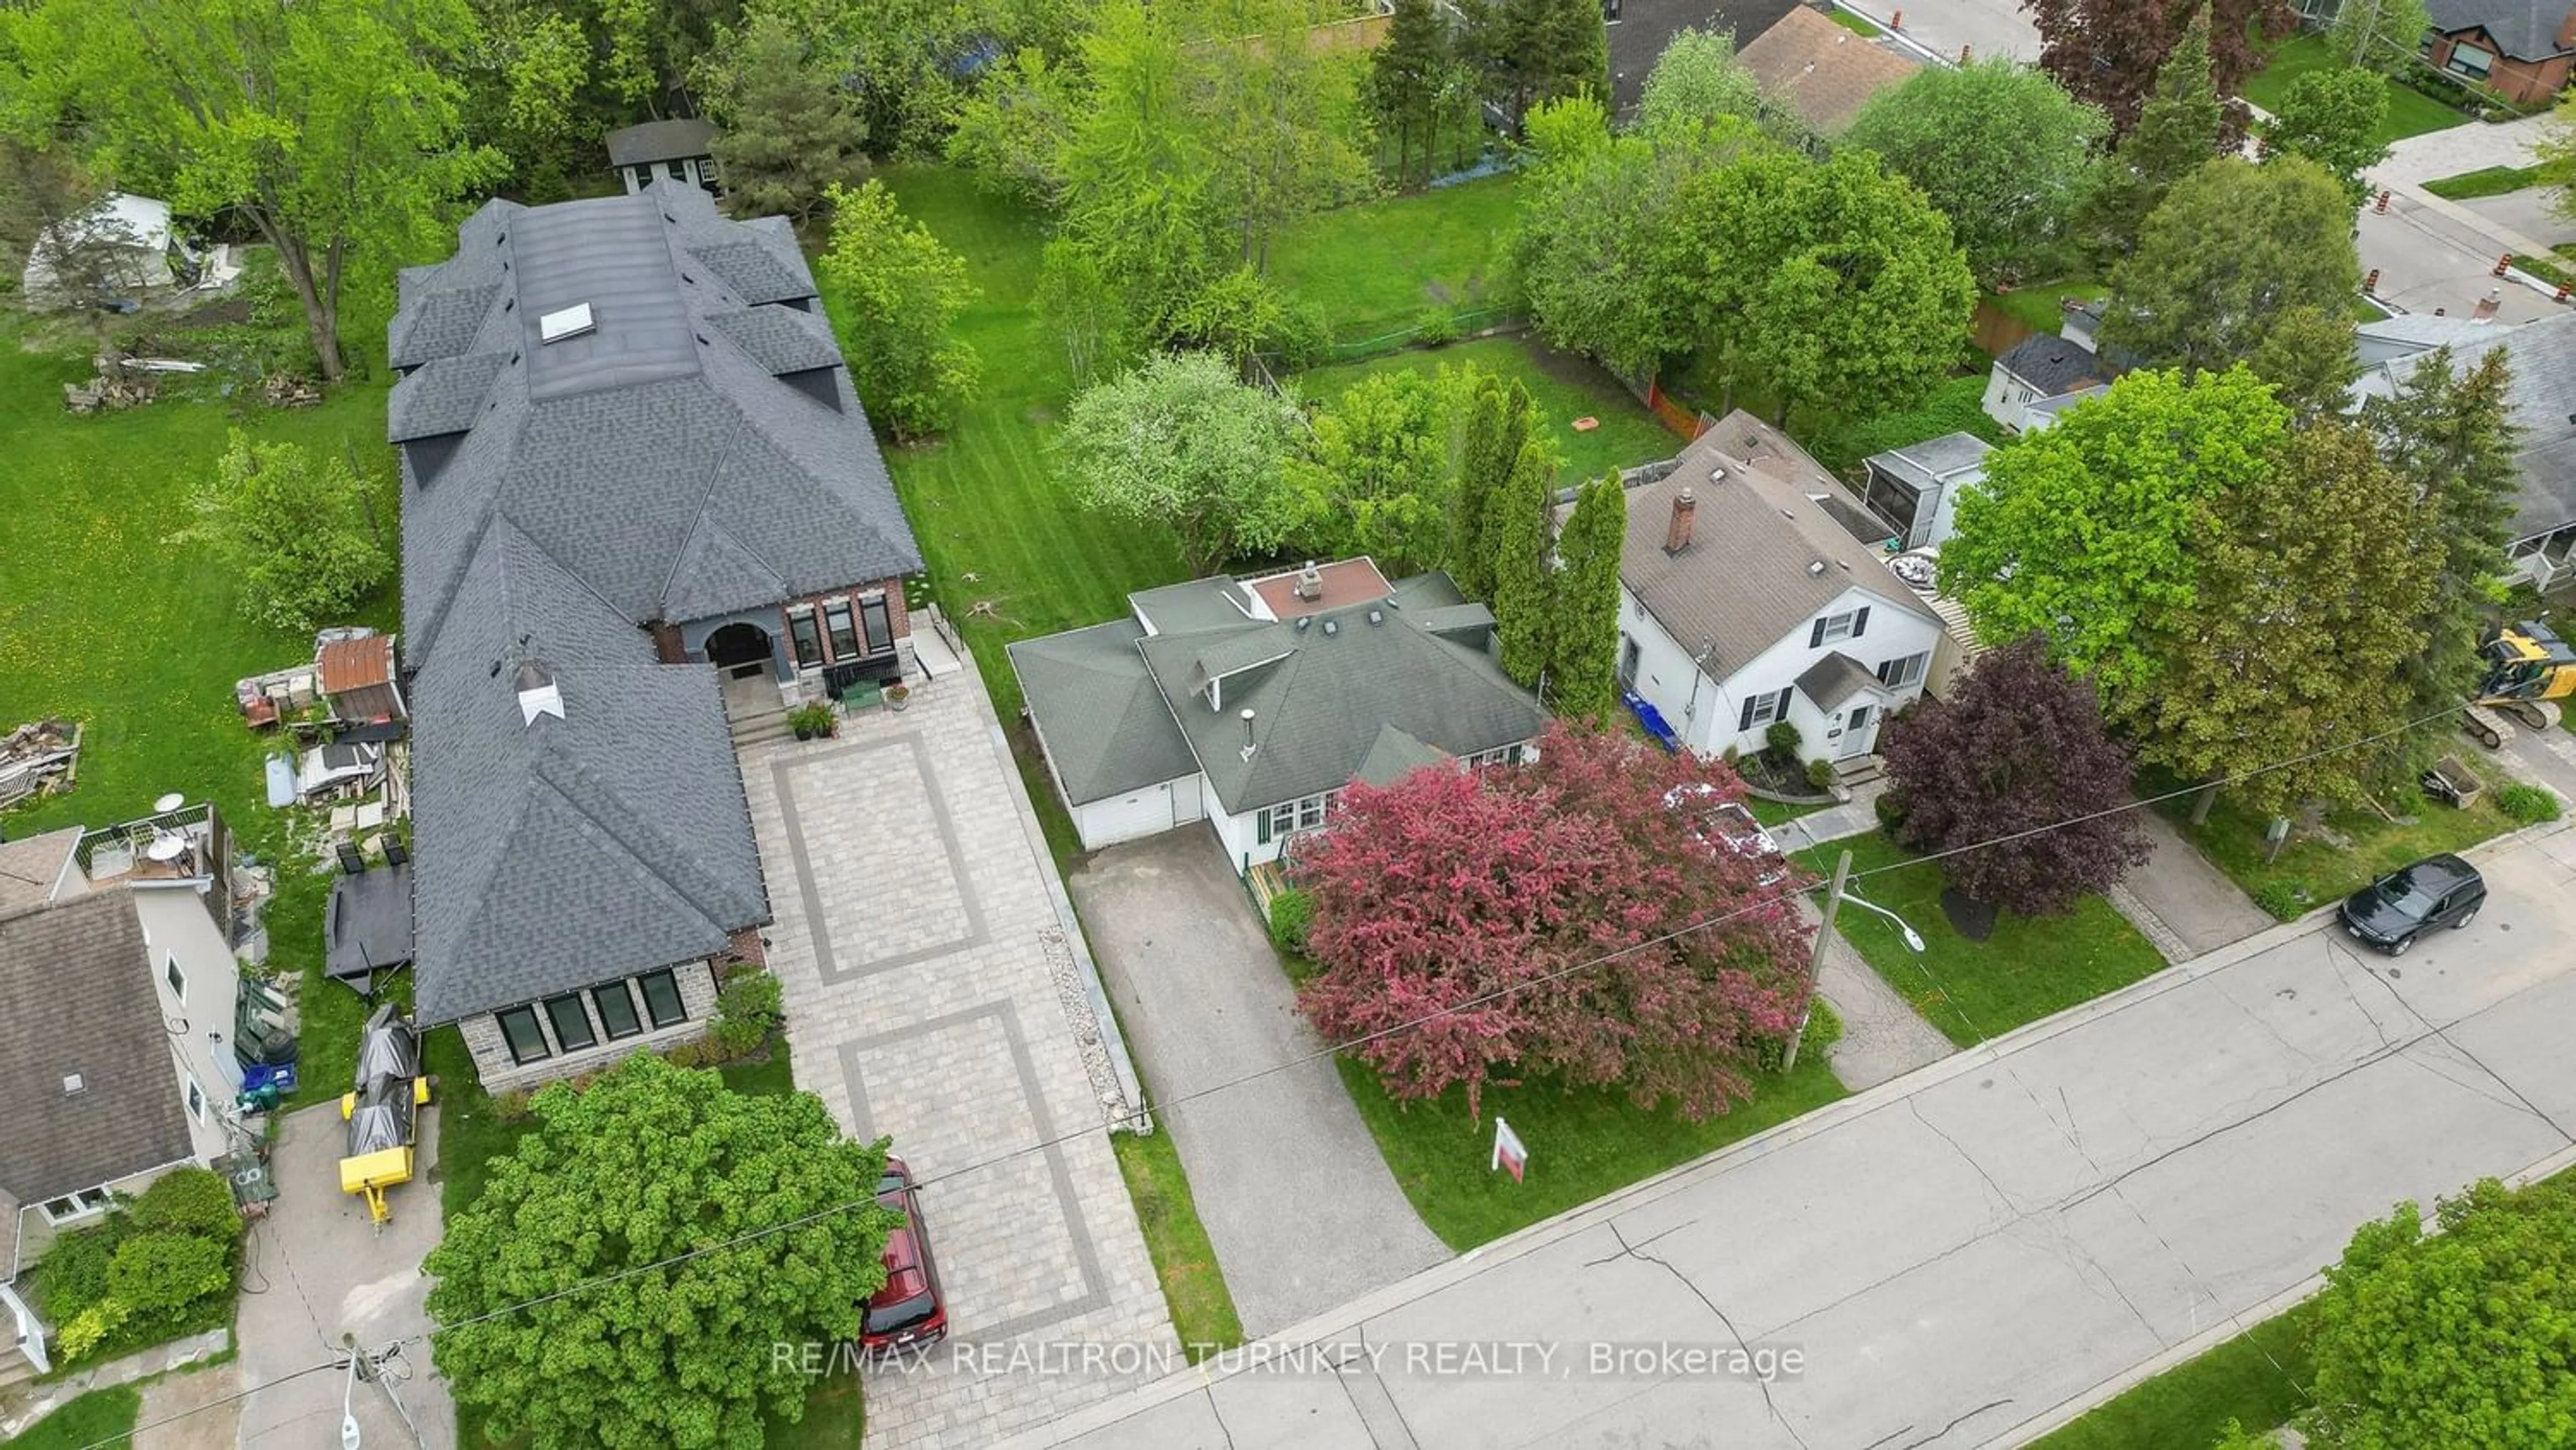 Frontside or backside of a home for 69 Kennedy St, Aurora Ontario L4G 1C3